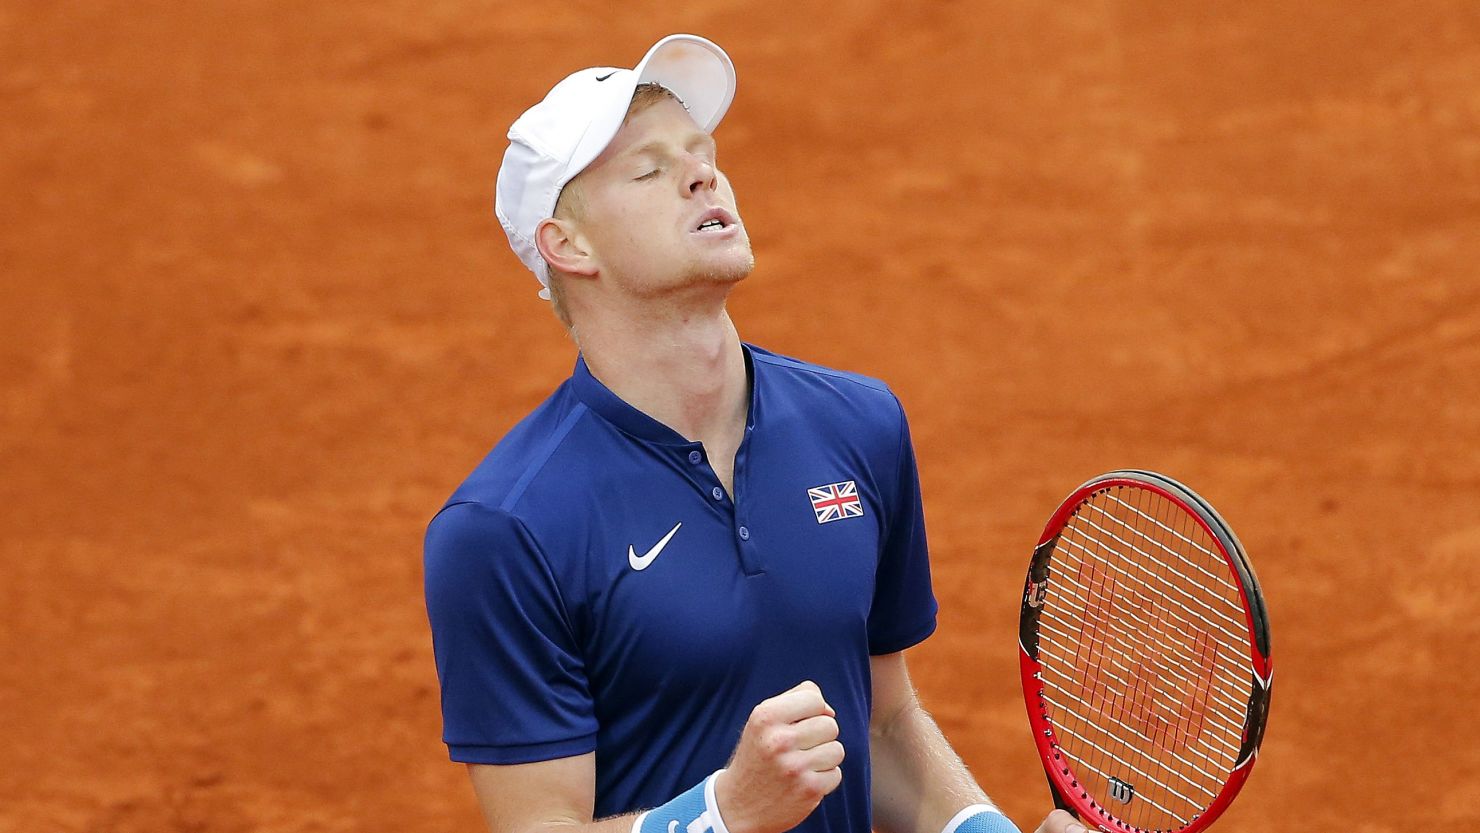 Britain's Kyle Edmund reacts after sealing their Davis Cup passage to the World Group semifinals after beating Serbia's Dusan Lajovic 